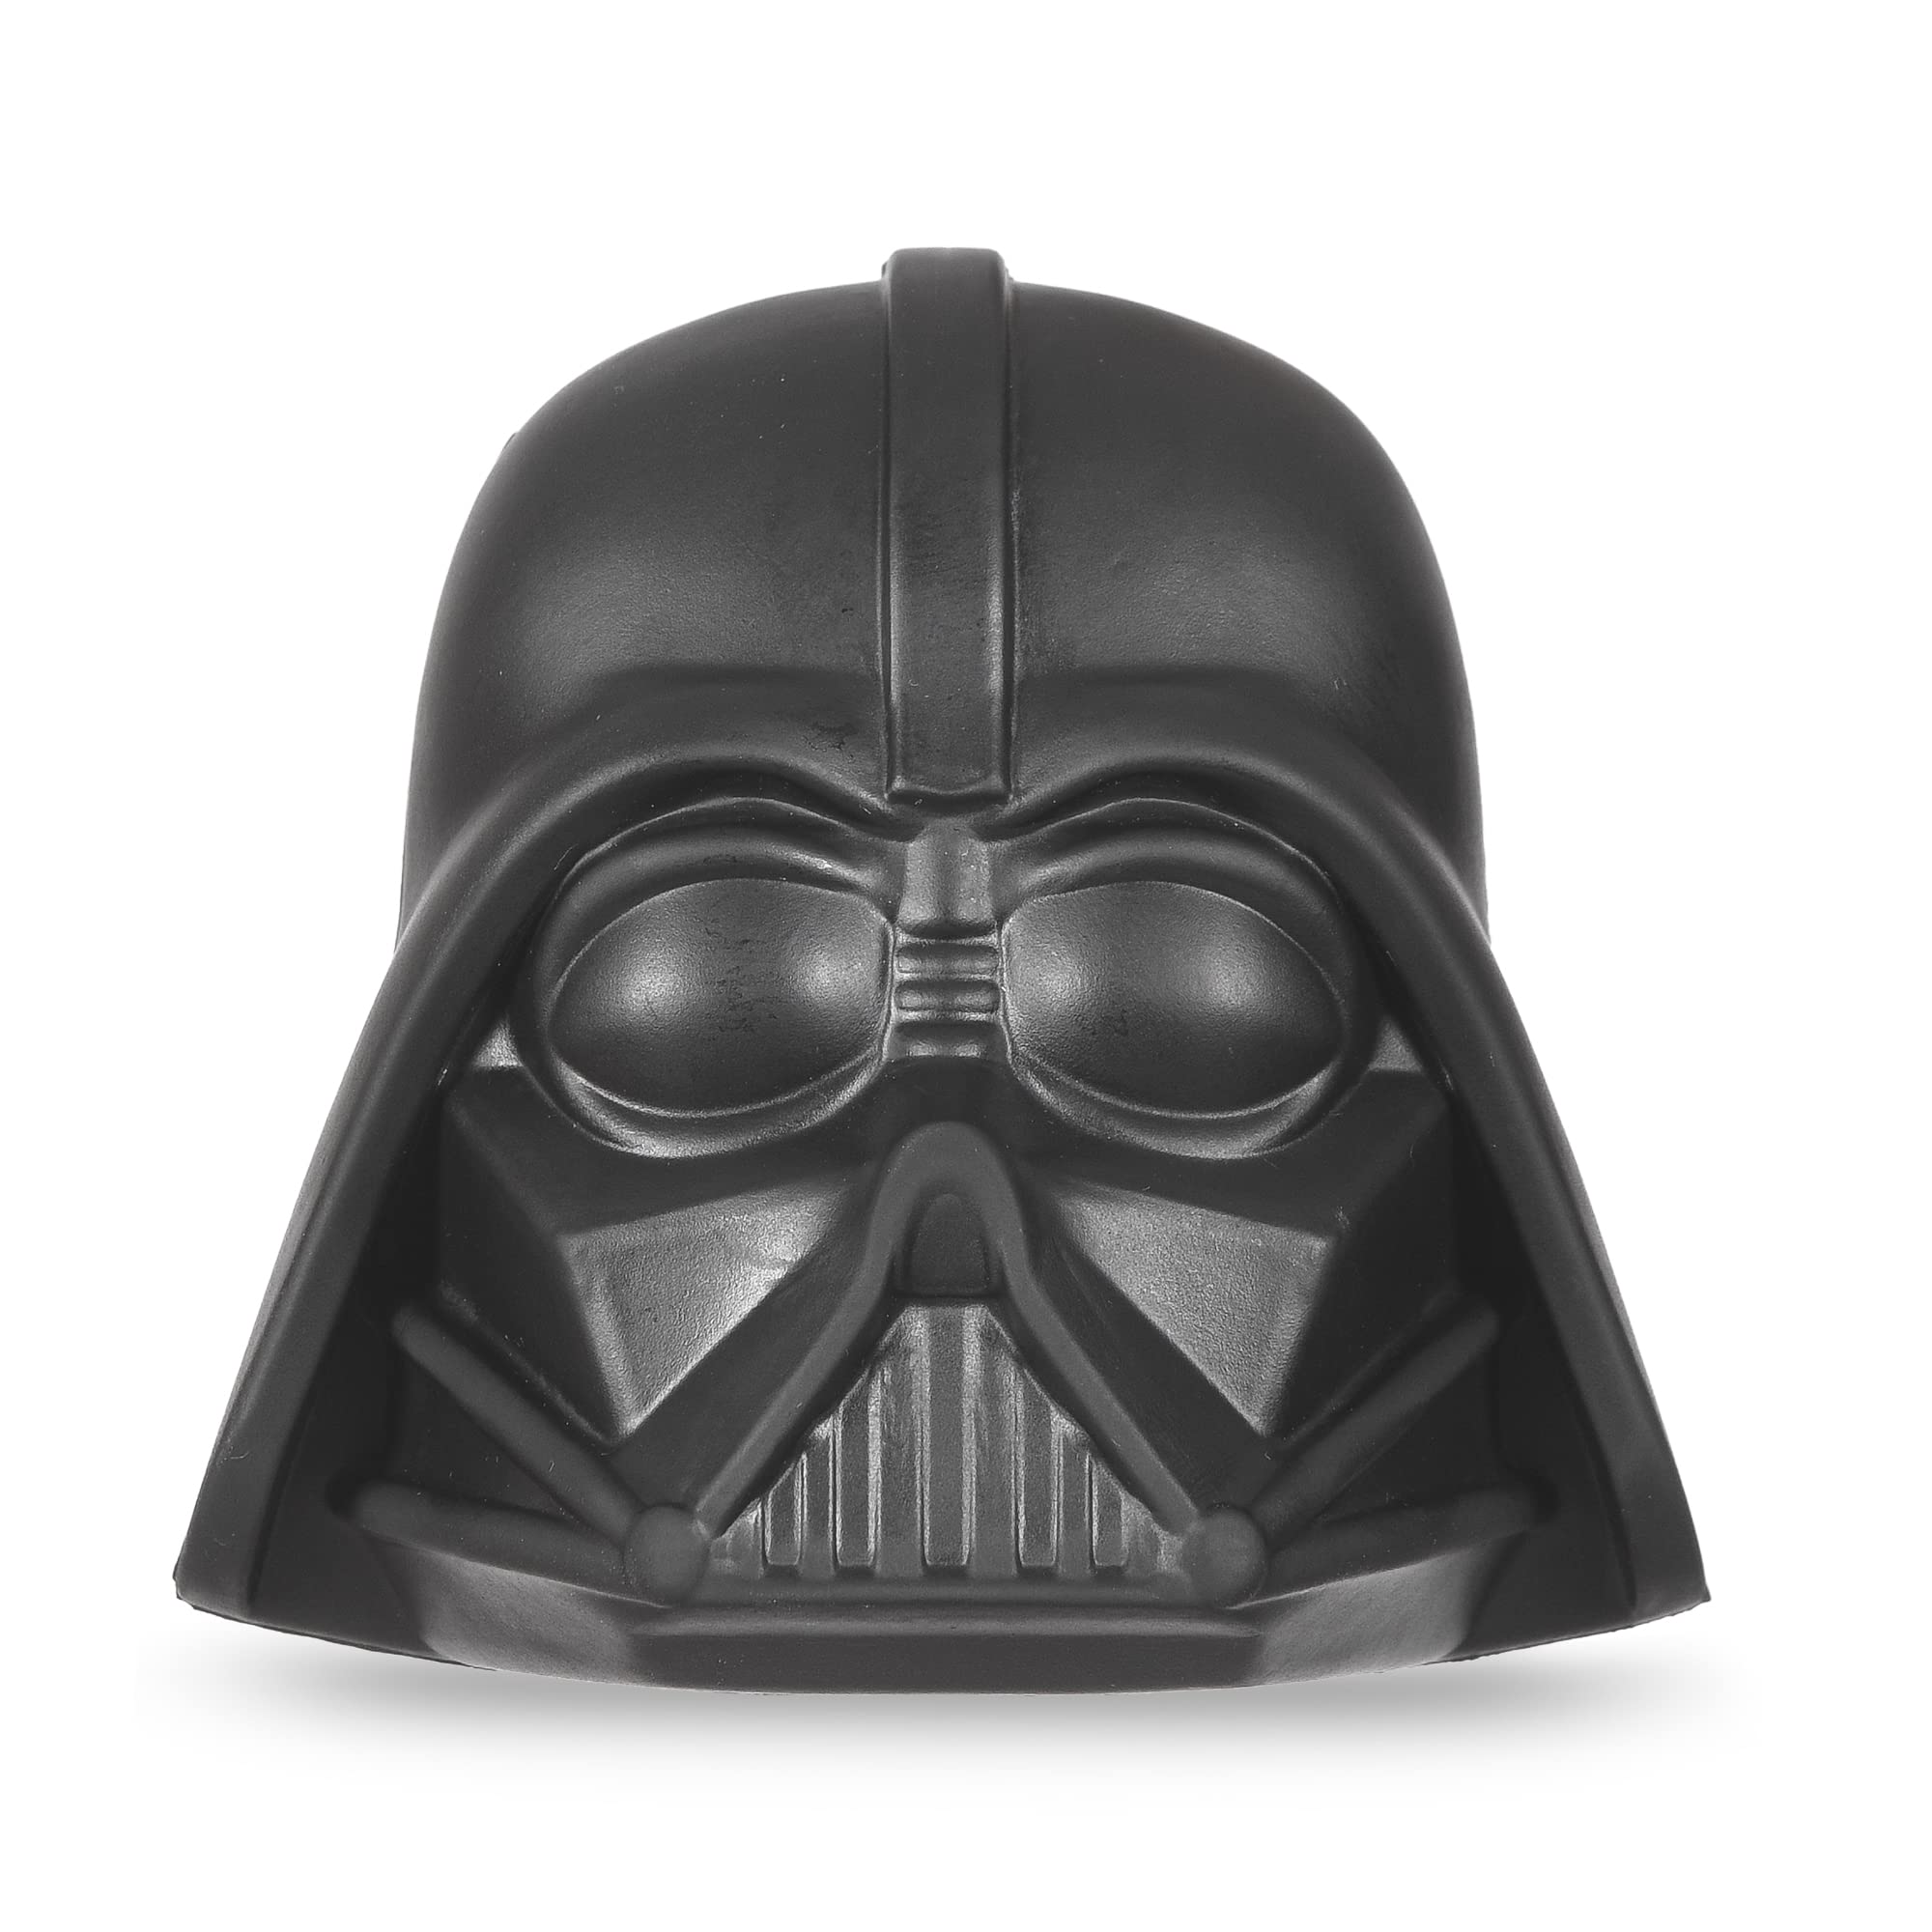 4" Star Wars Darth Vader Rubber Head Dog Squeaky Toy $5.15 + Free Shipping w/ Prime or on orders $35+